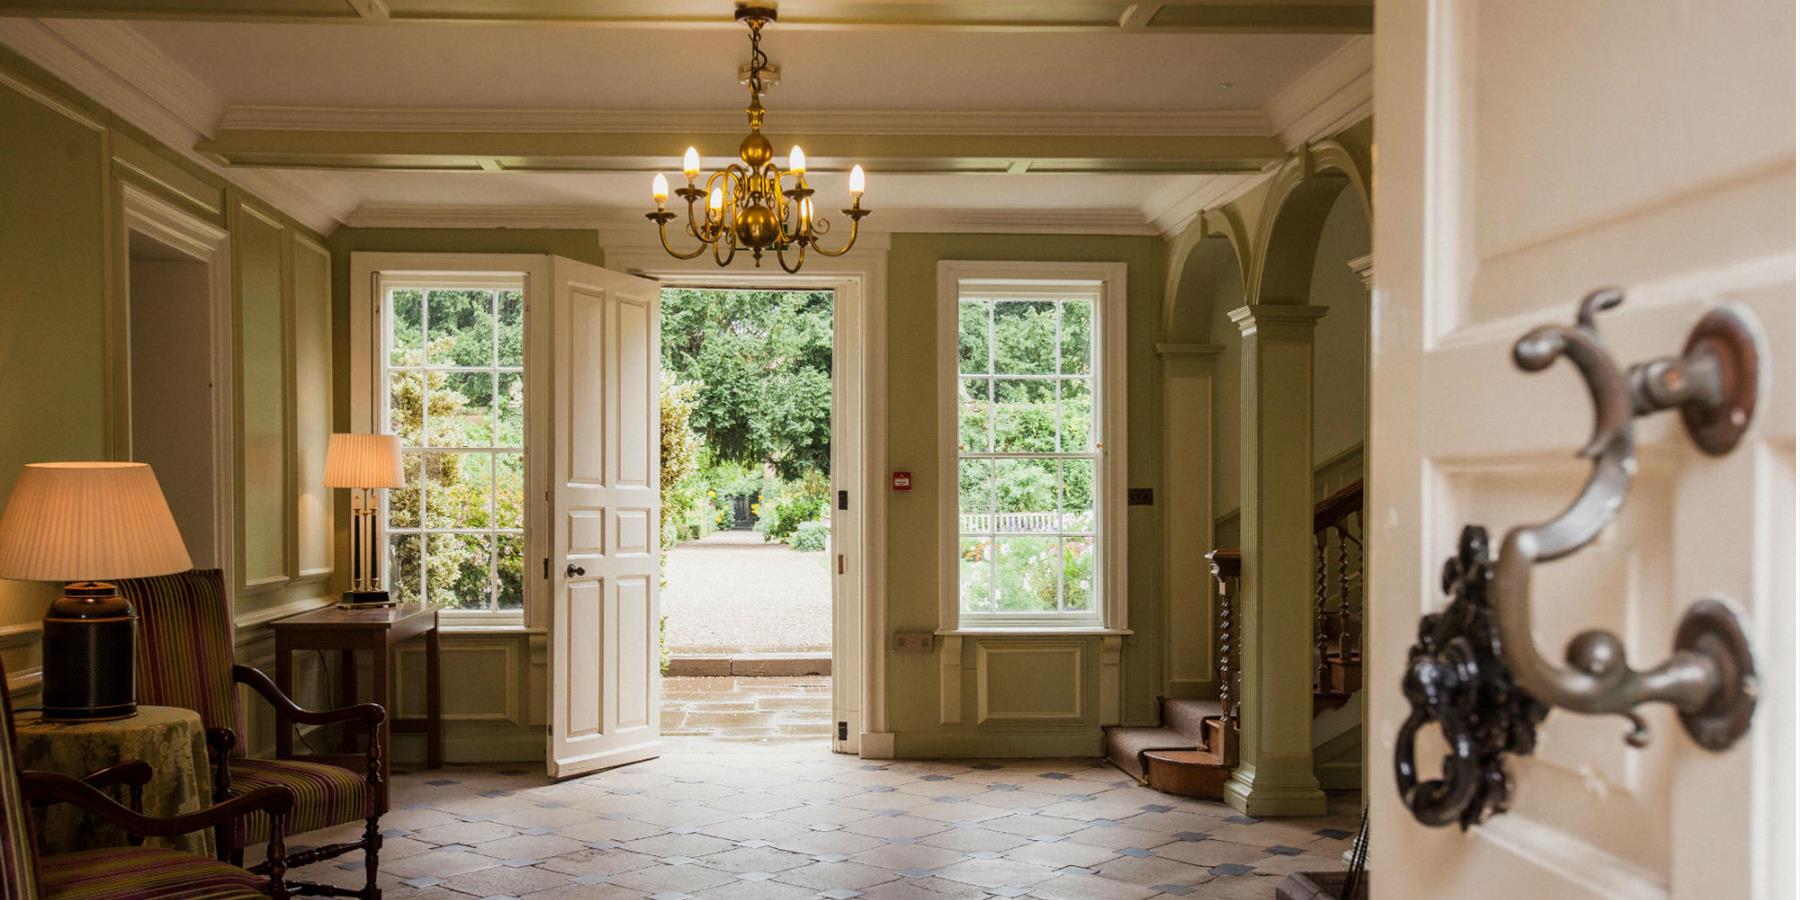 Free Guided Tours of Belgrave Hall & Gardens this Spring